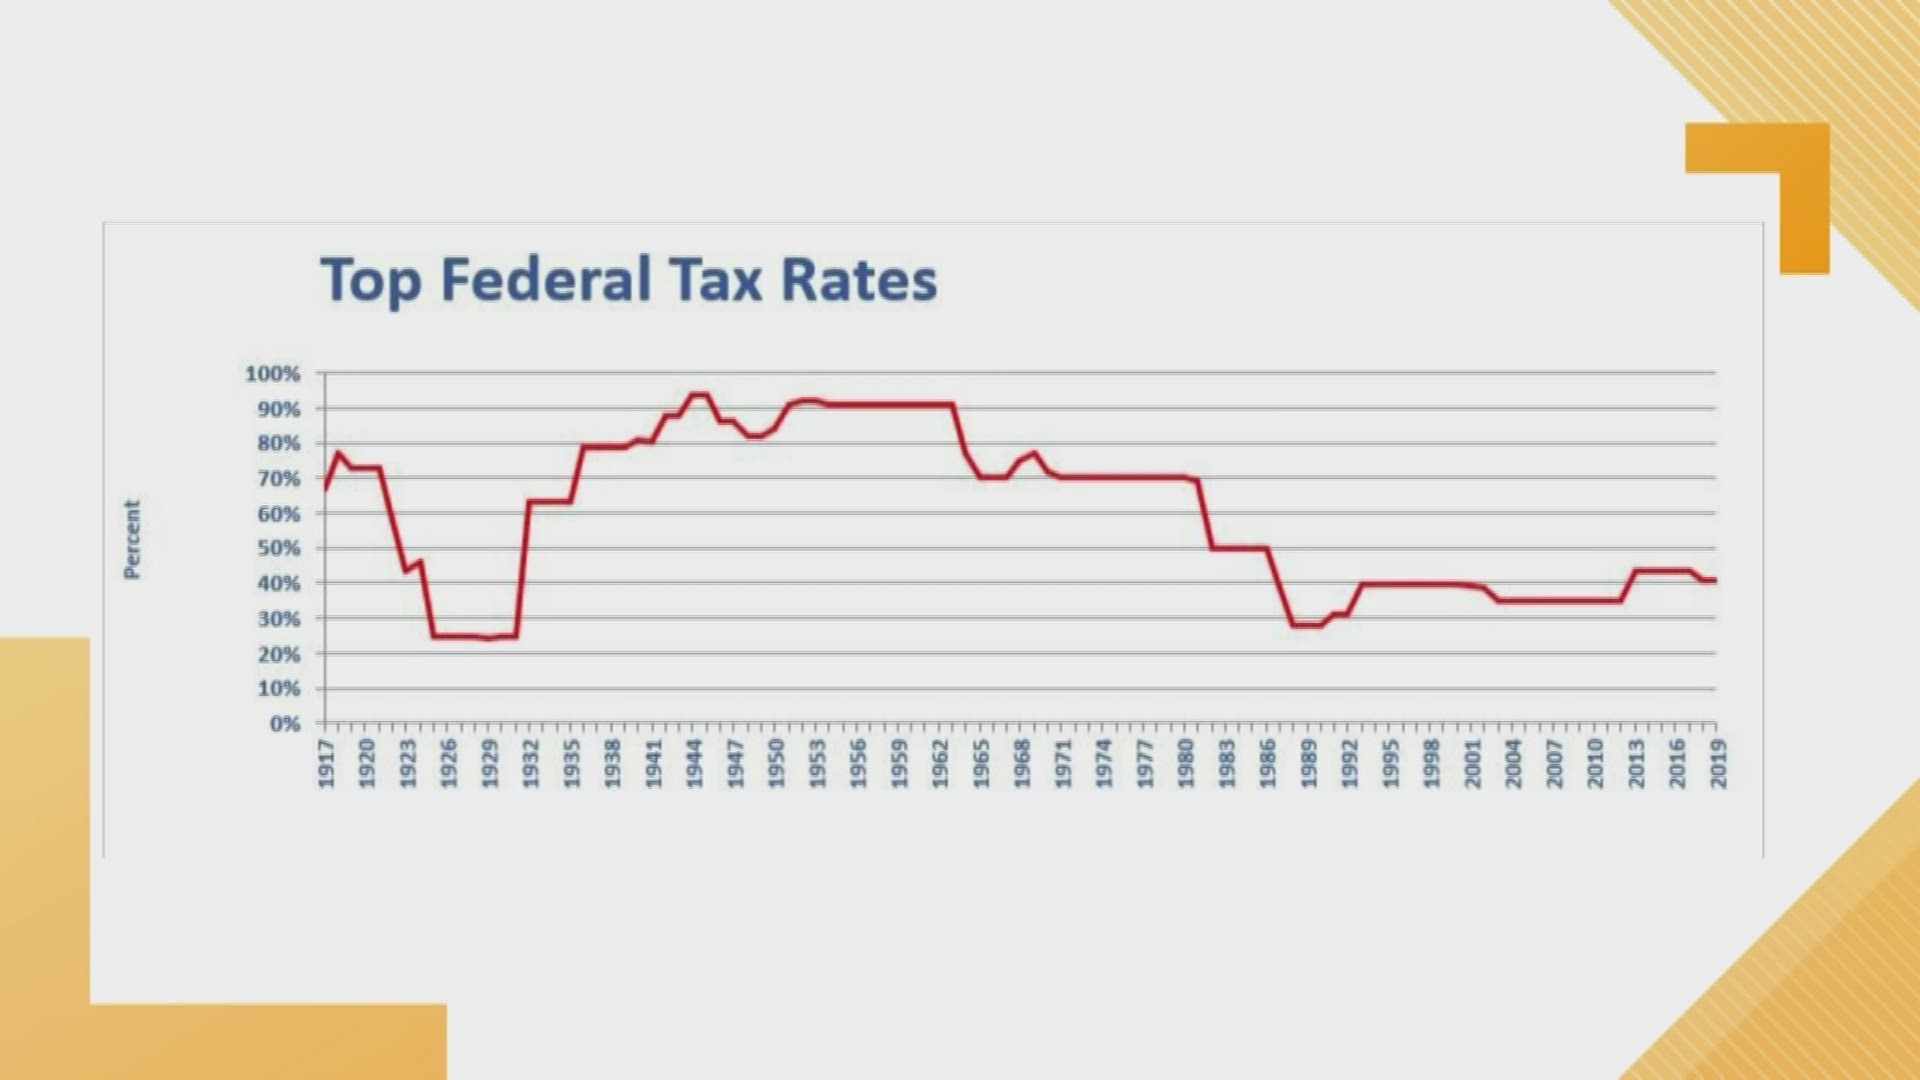 Financial Expert Randy Waesche sits down with Eric to break down the history of Federal income tax rates in honor of the 2019 tax day.